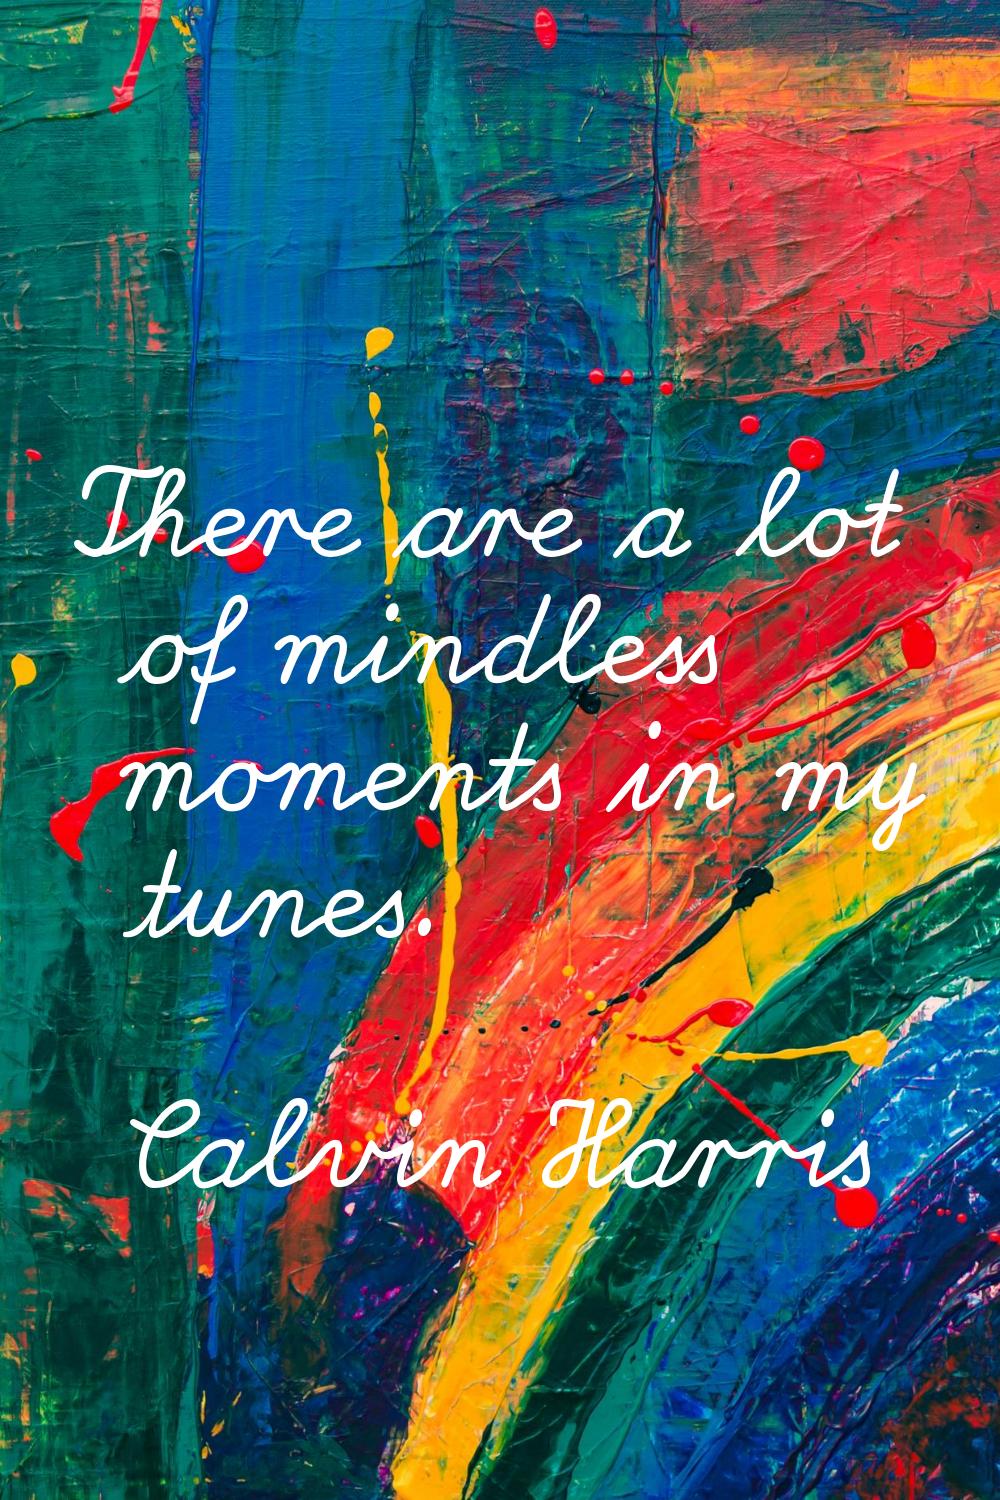 There are a lot of mindless moments in my tunes.